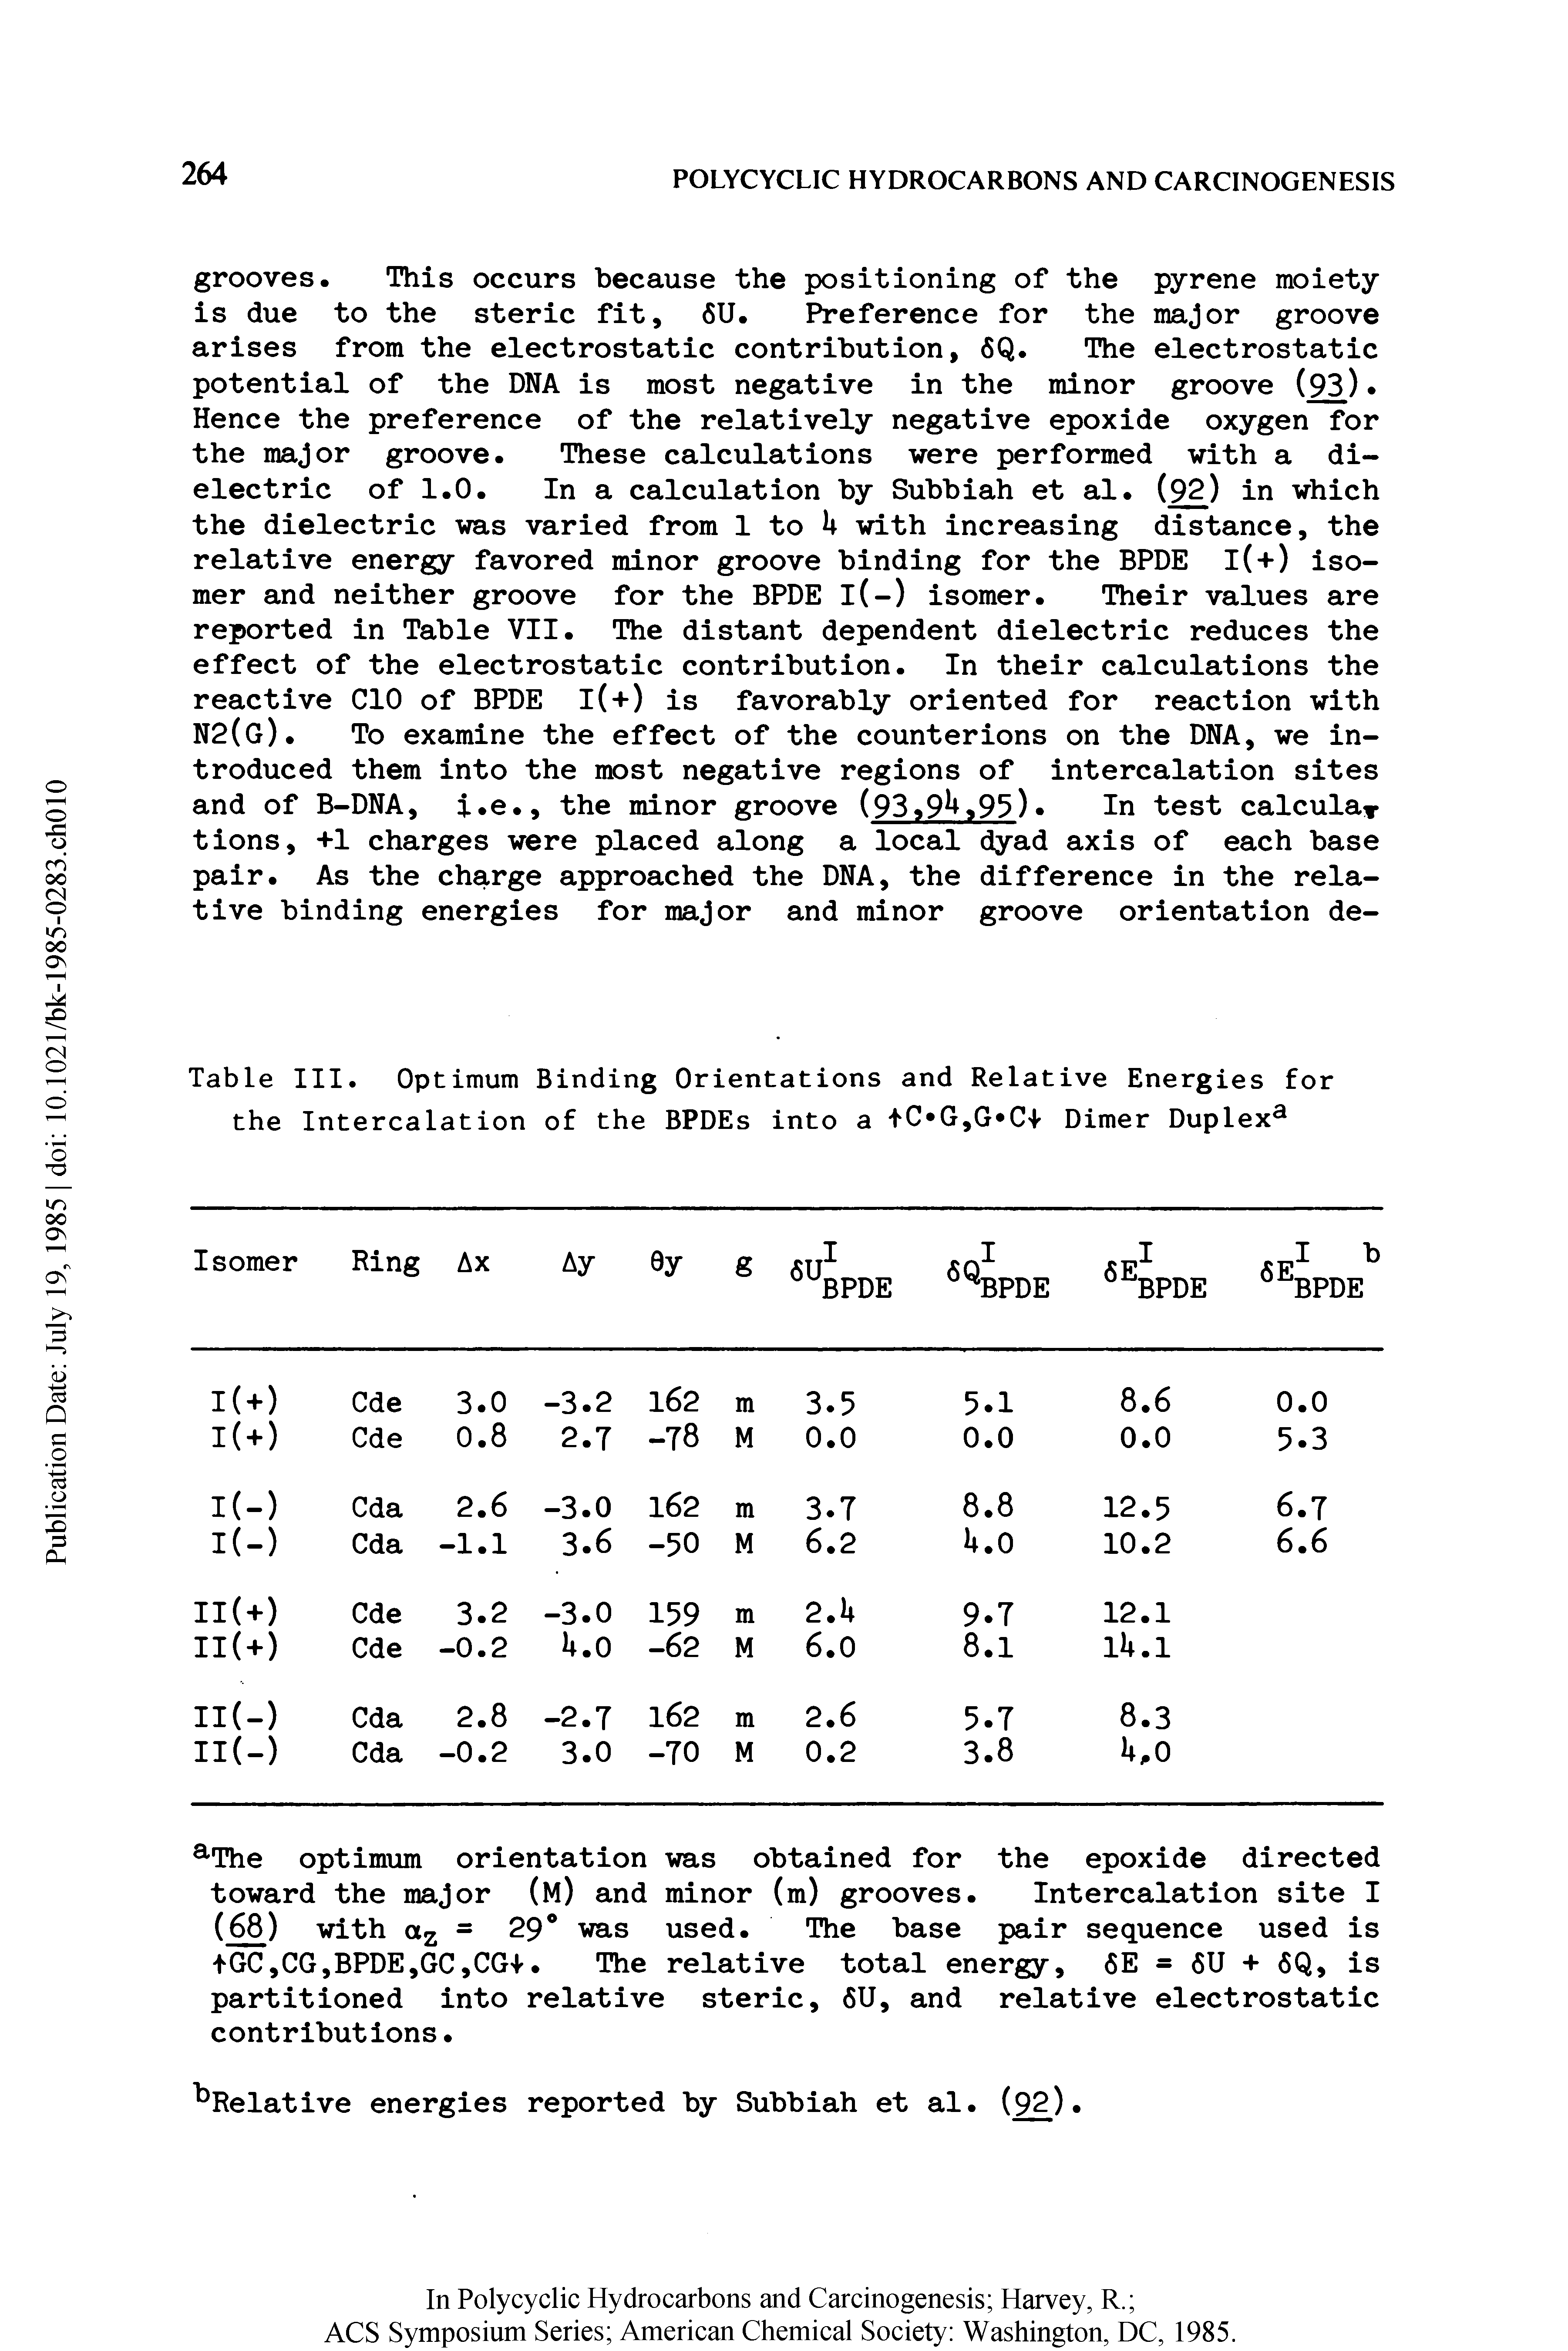 Table III. Optimum Binding Orientations and Relative Energies for the Intercalation of the BPDEs into a tC G,G C+ Dimer Duplex3...